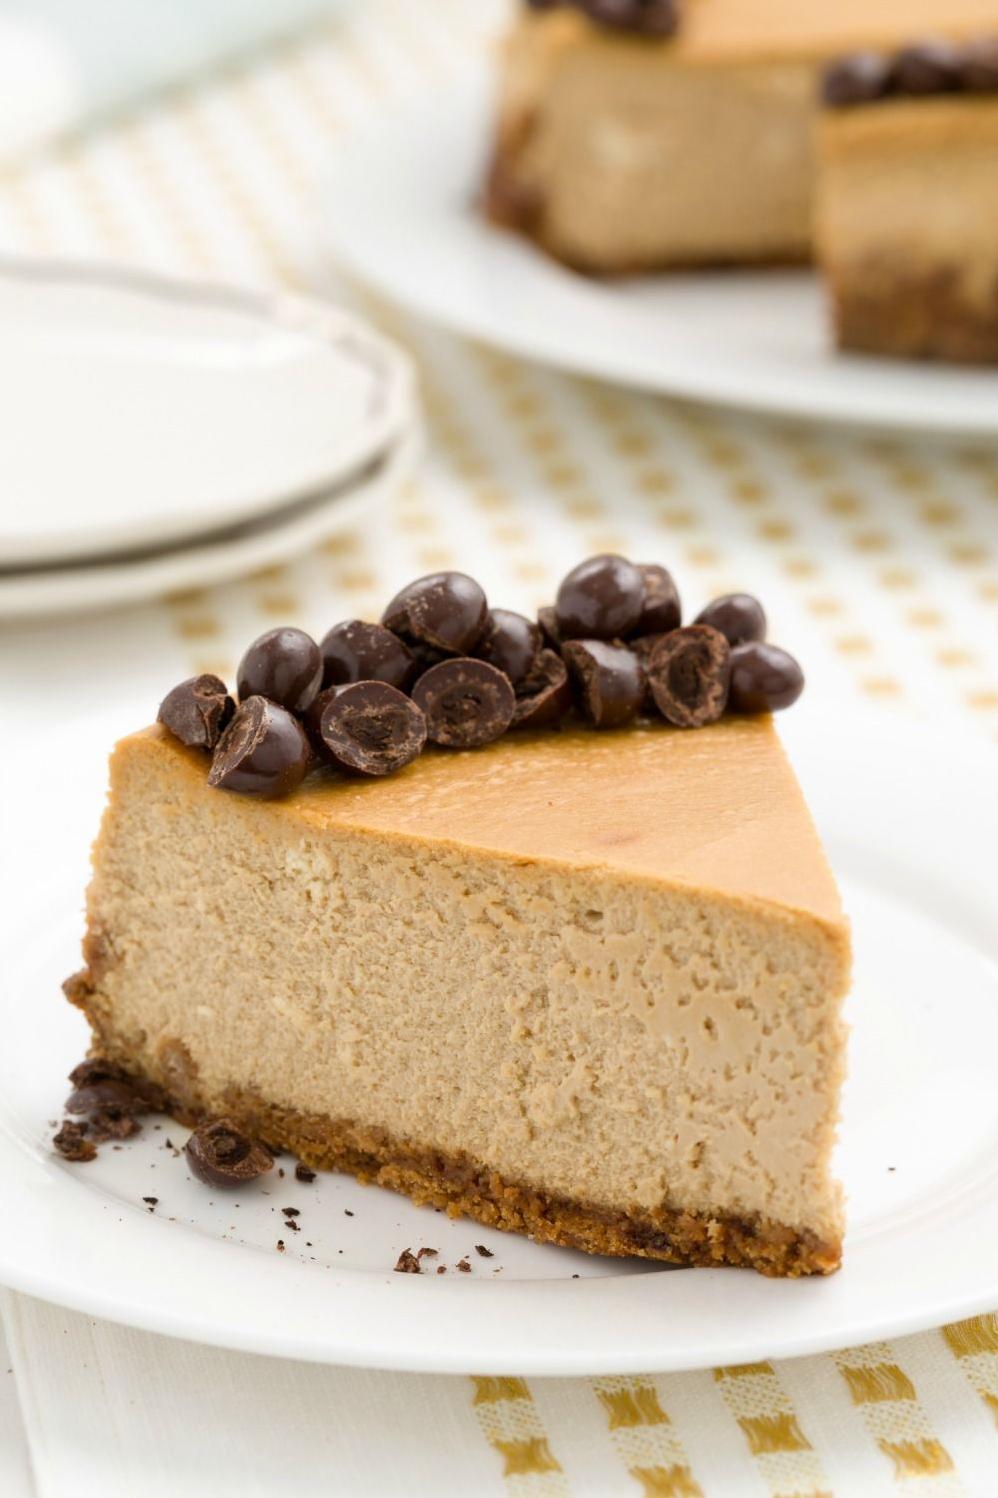  Smooth texture and rich flavor - a French Vanilla Cappuccino Cheesecake delight